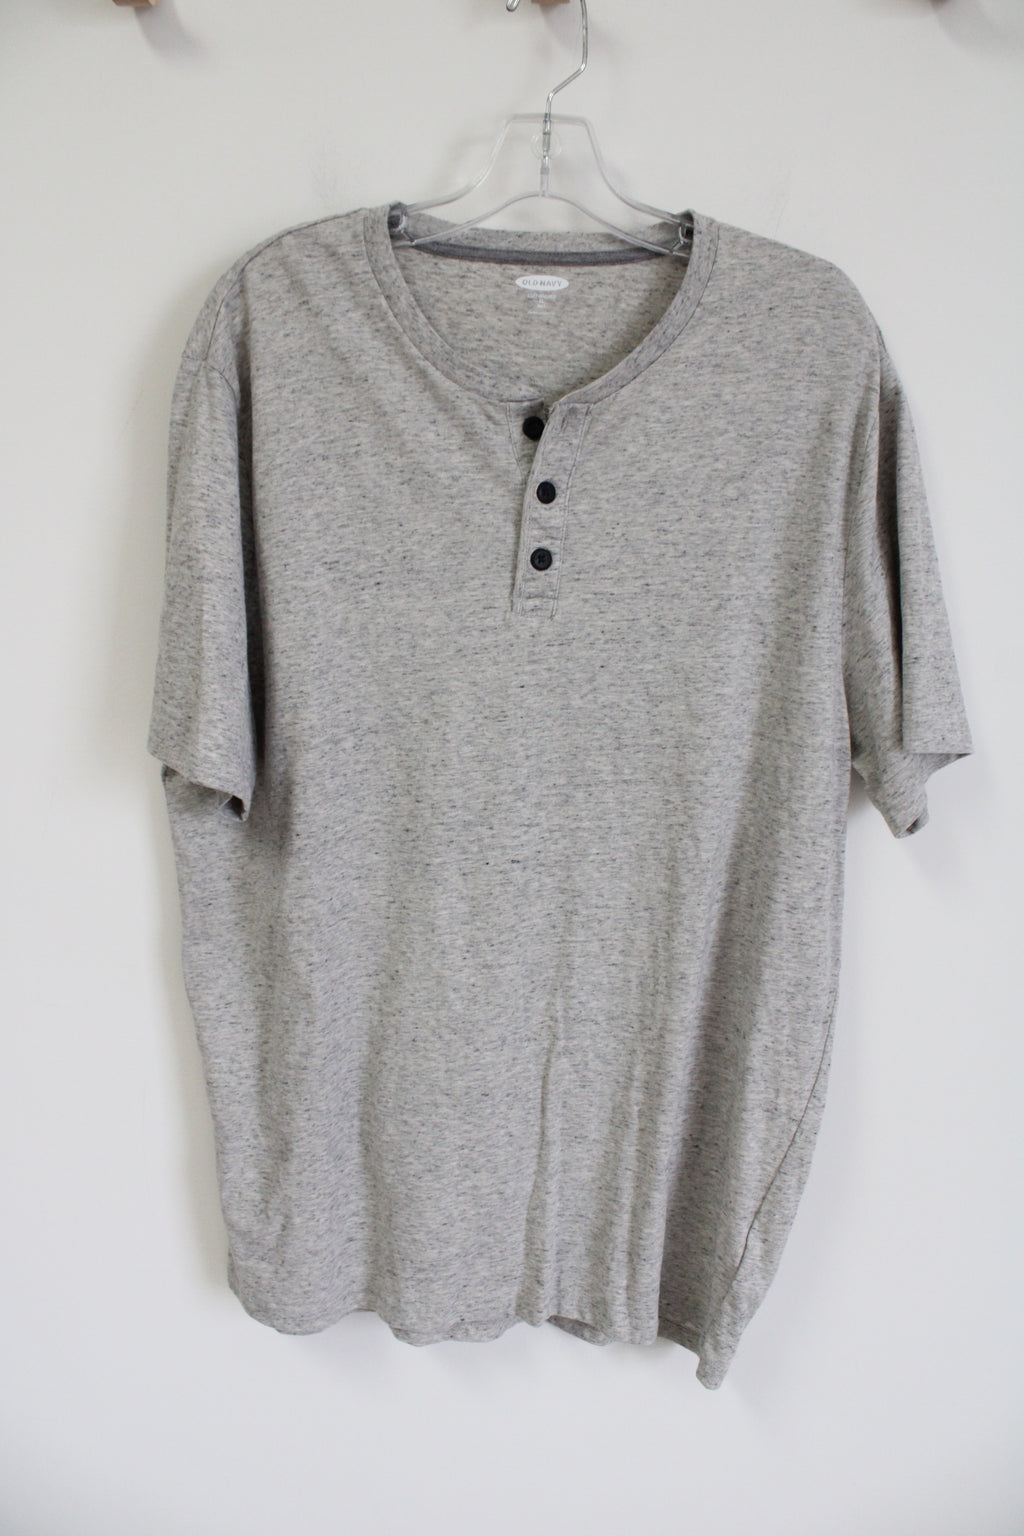 Old Navy Soft Washed Gray Henley Shirt | XL Tall